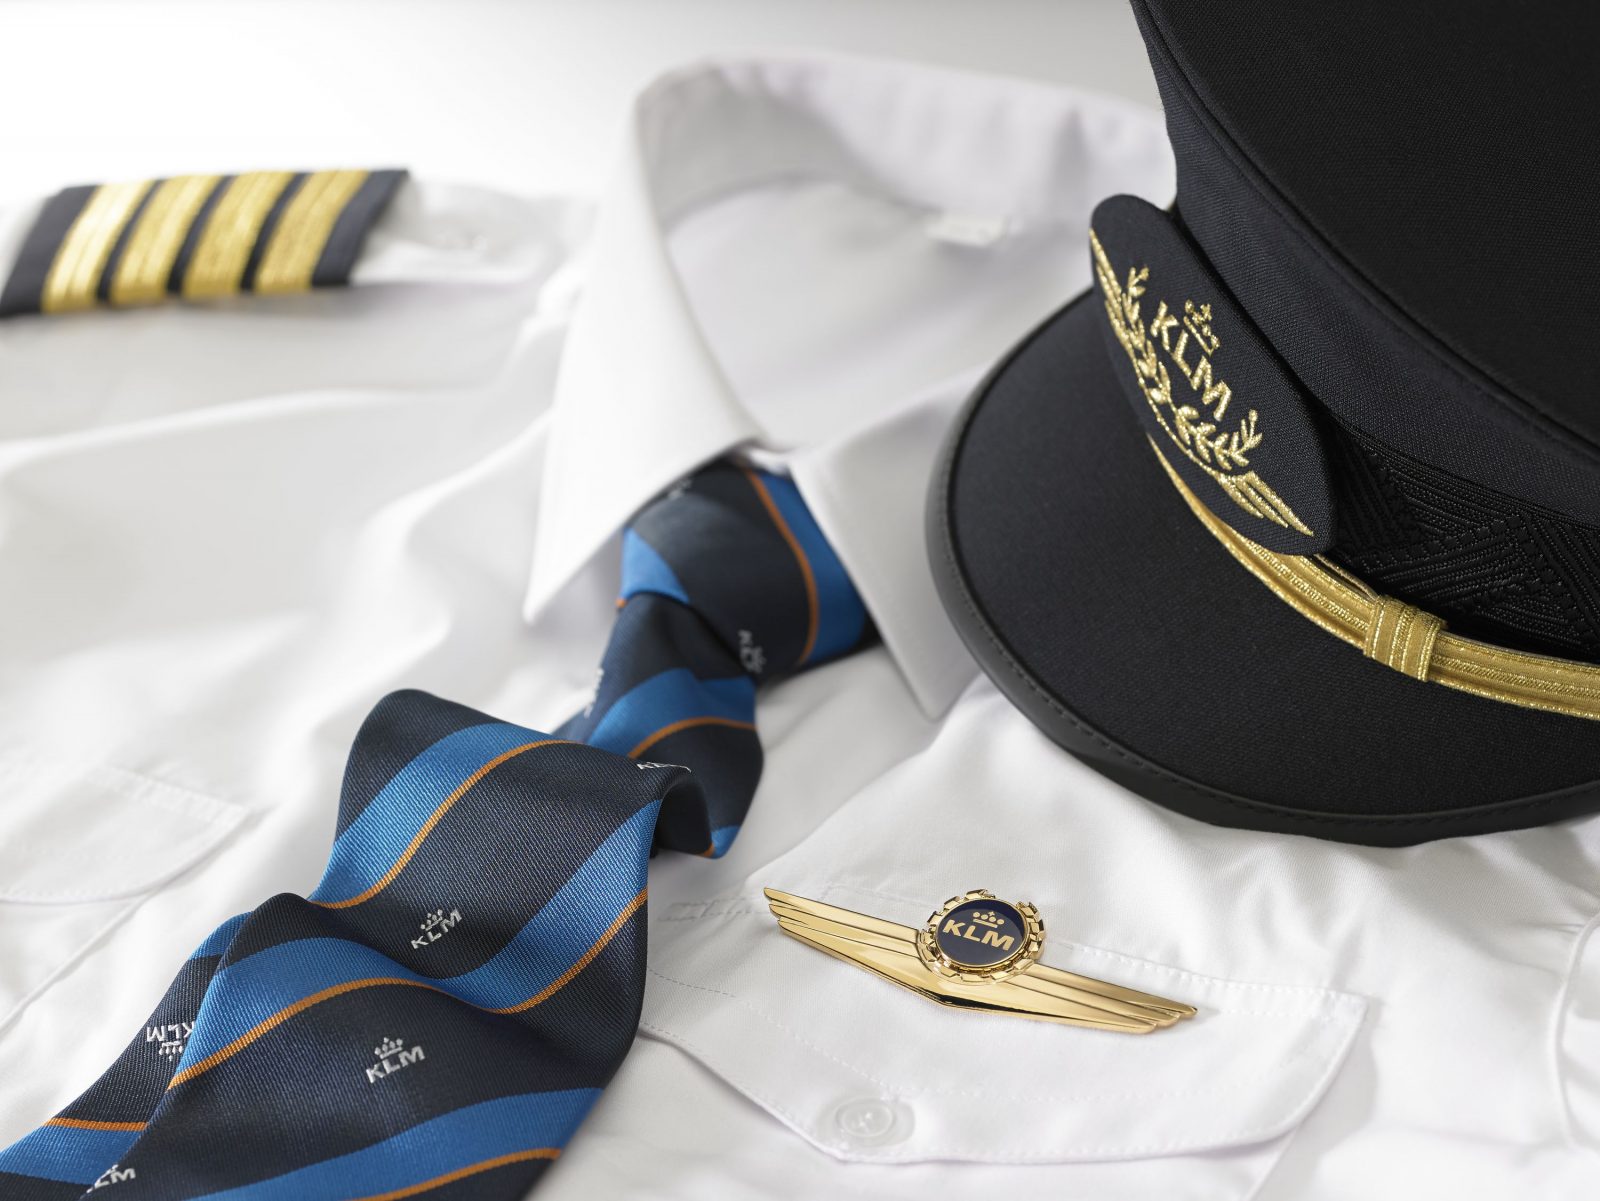 The Pilot's Cap is No More: KLM Ditches Iconic Uniform for Captain's and First Officer's